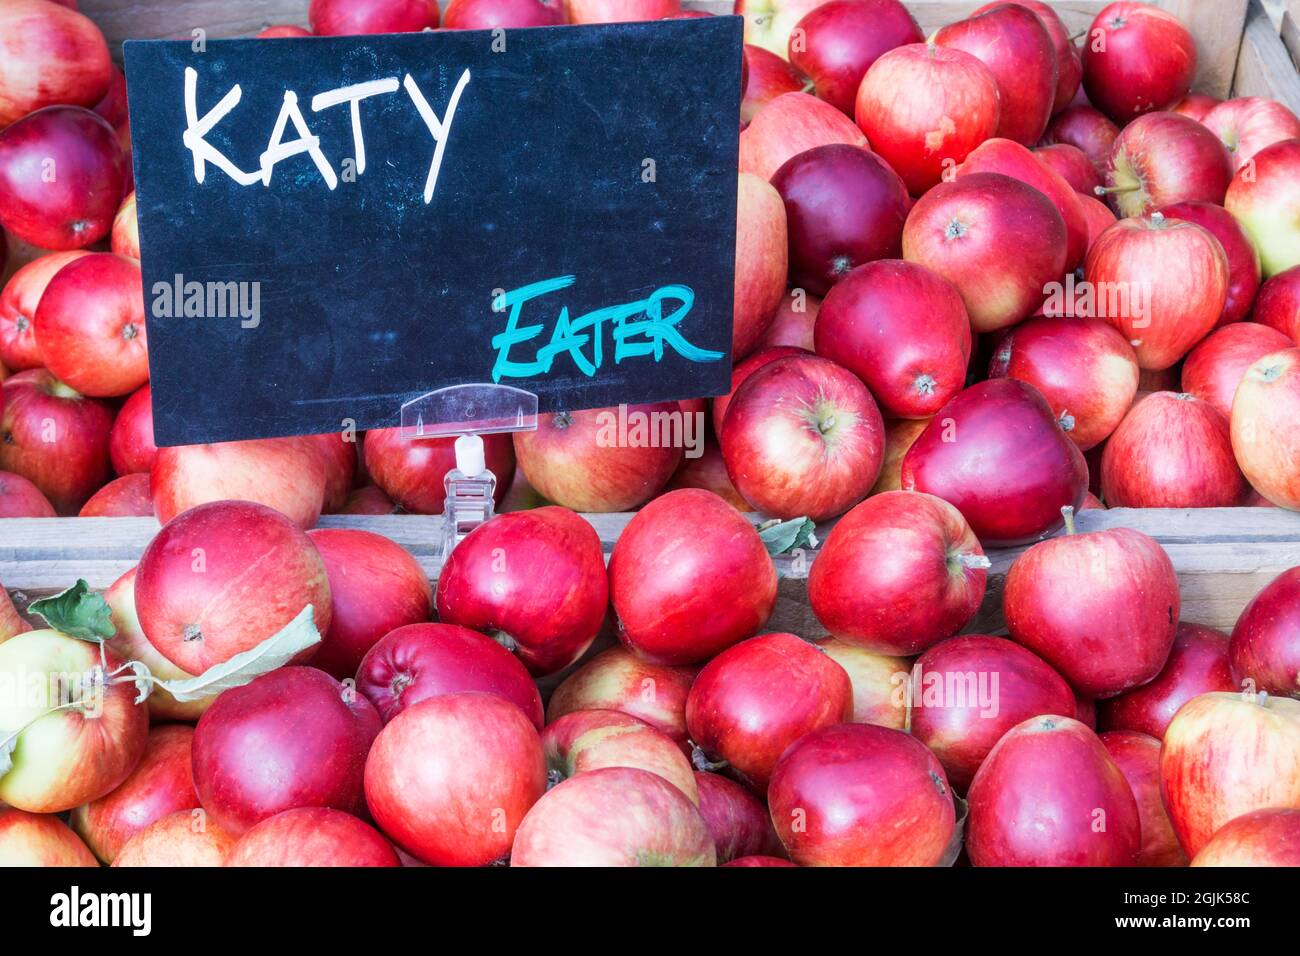 Boxes of Katy or Katya eating apples for sale. Stock Photo